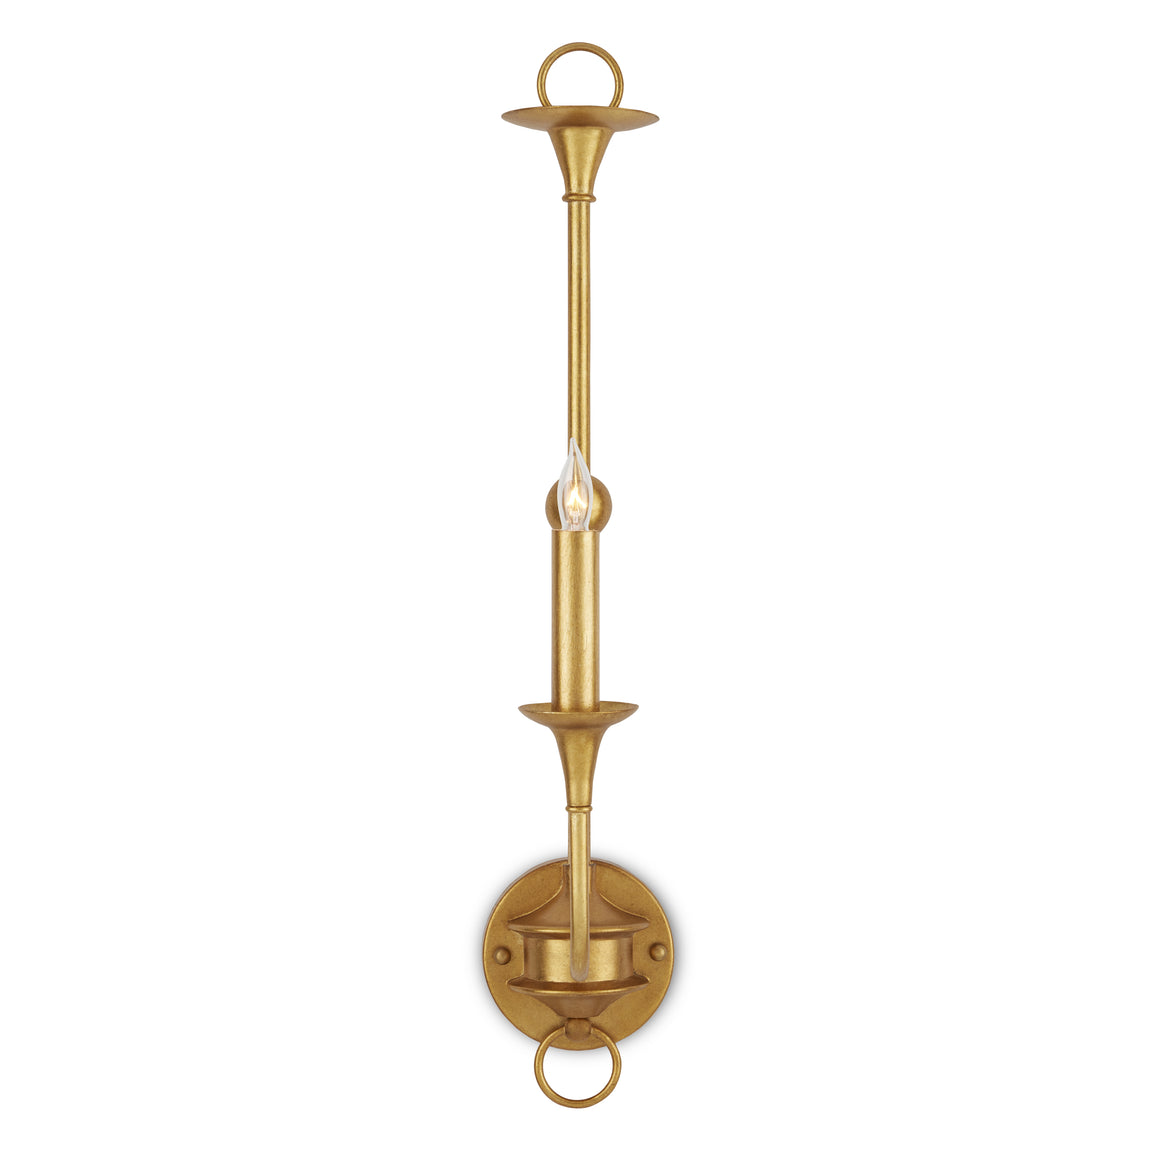 Nottaway Gold Wall Sconce